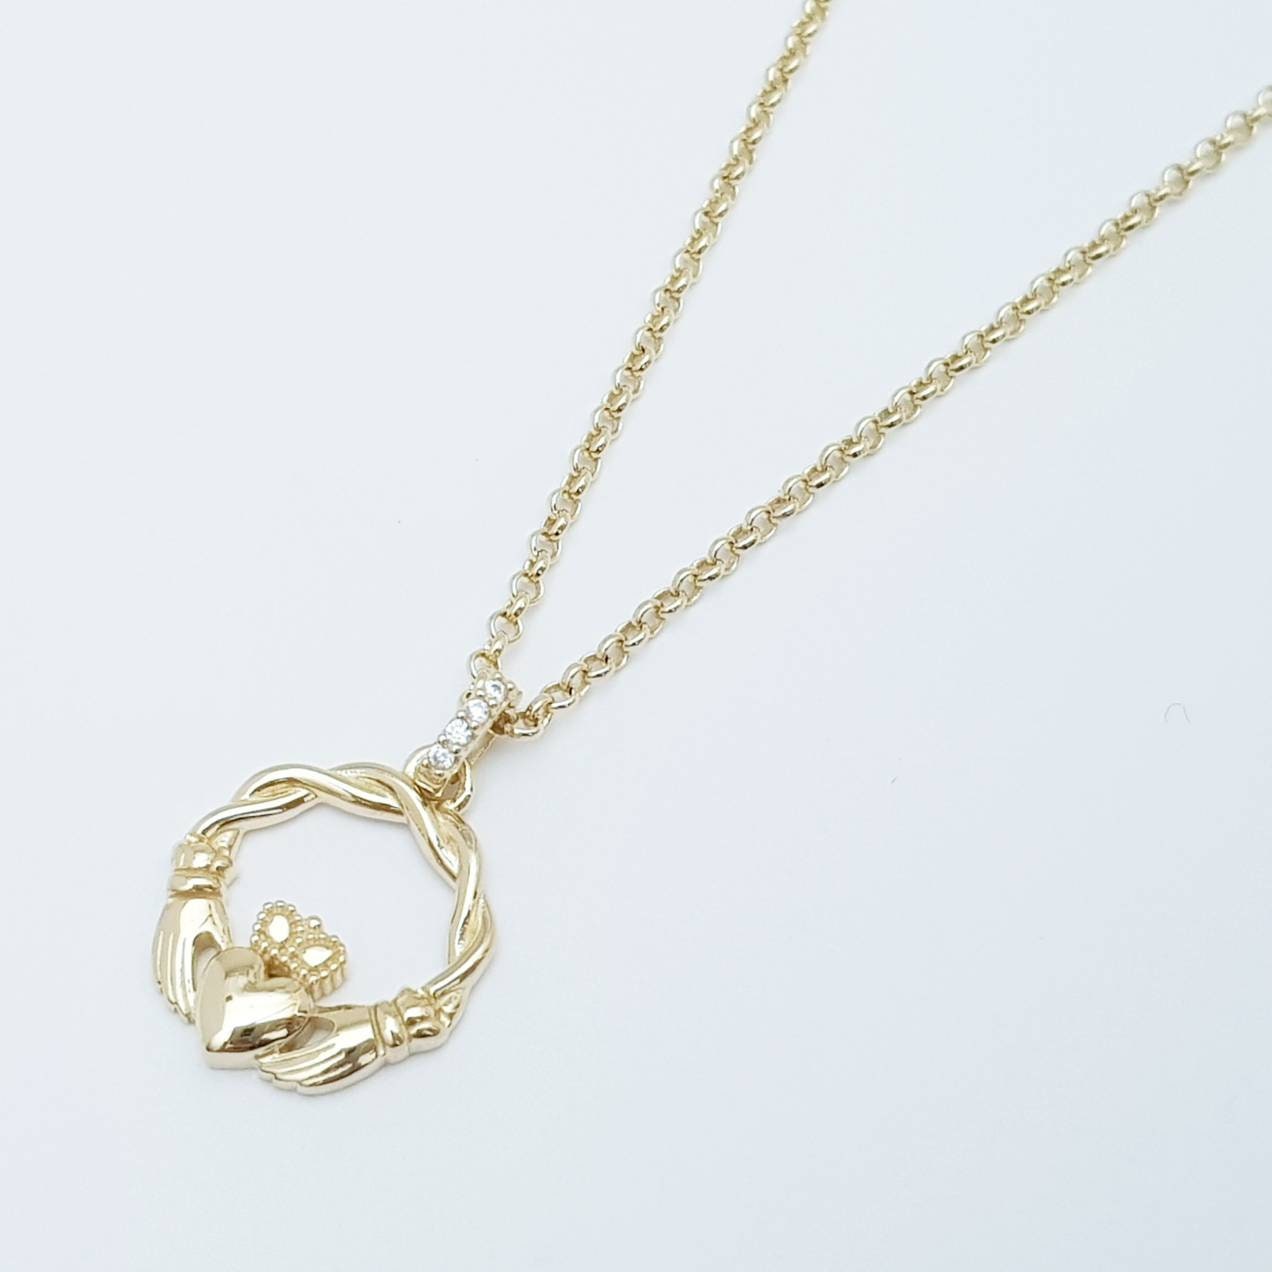 Dainty Sterling Silver claddagh necklace with gold plating and intertwined celtic braid.